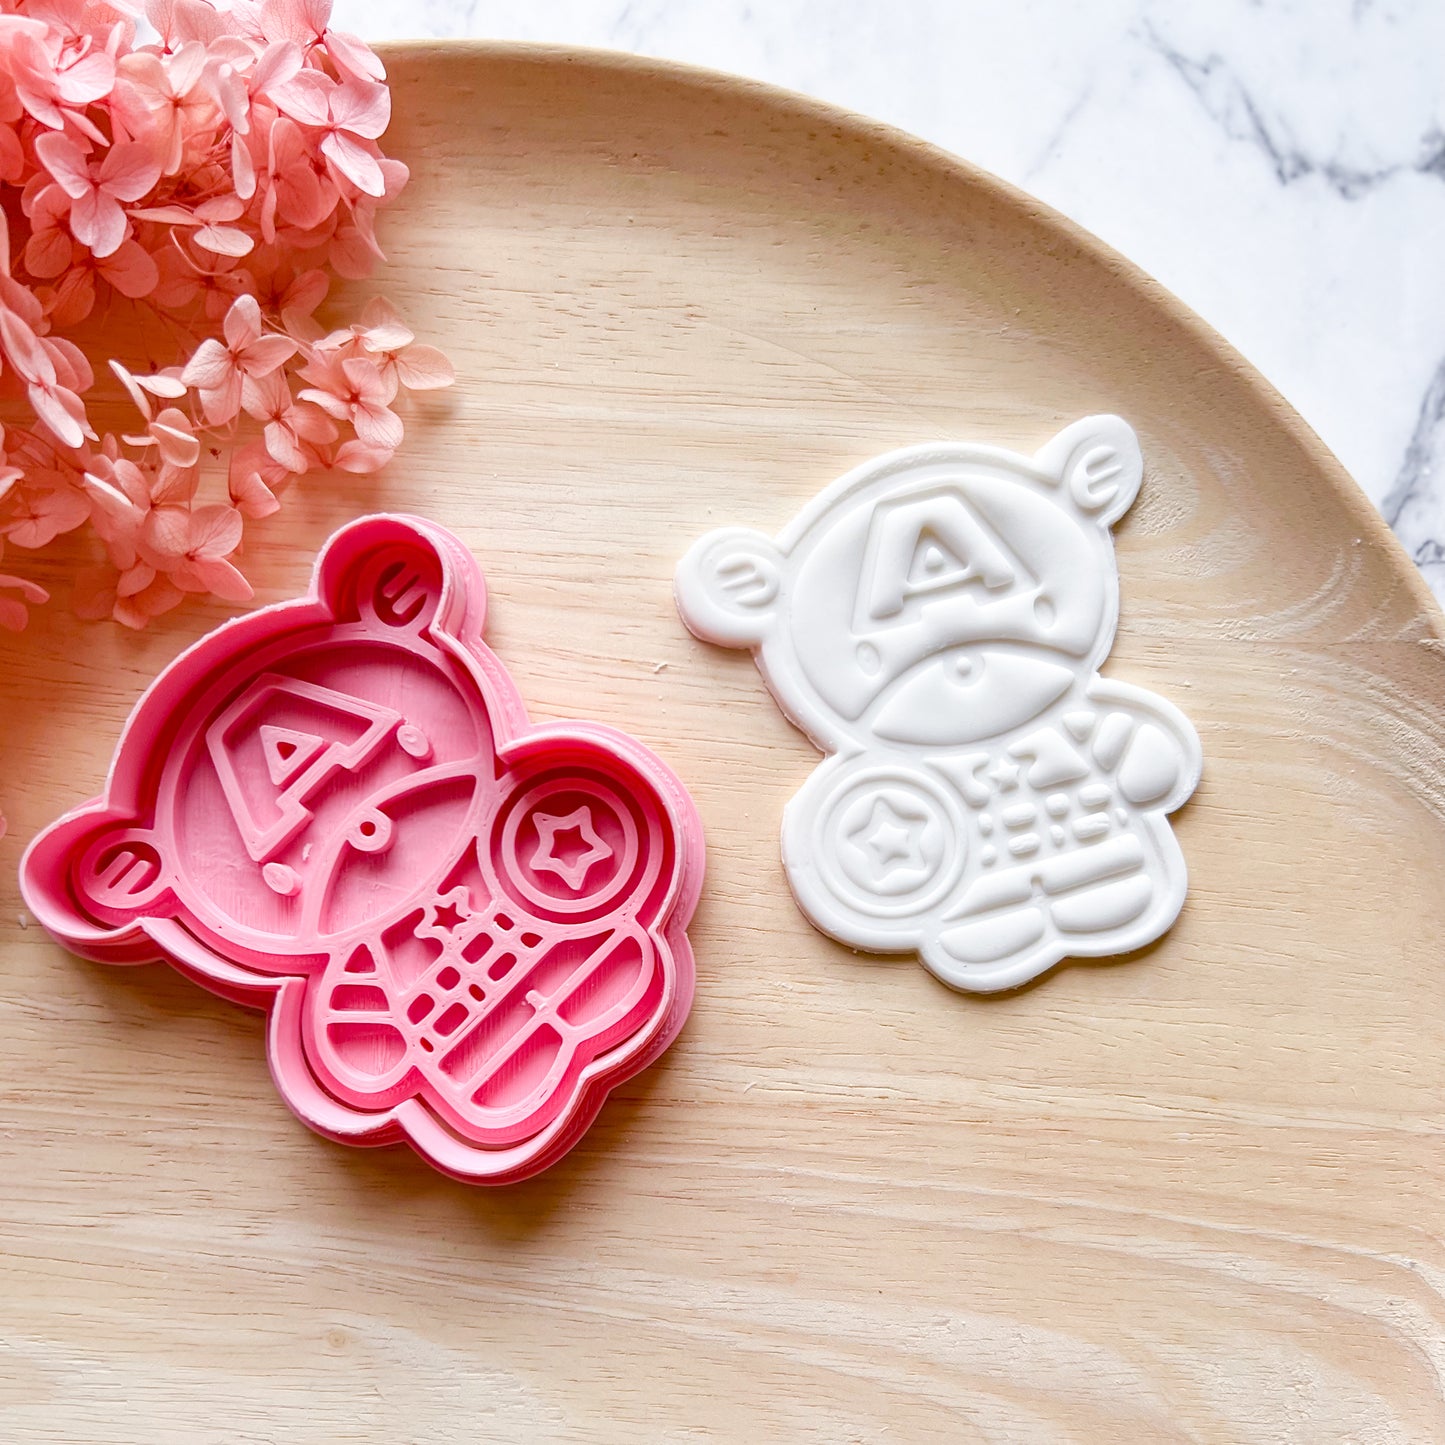 Captain America Cookie Cutter & Stamp